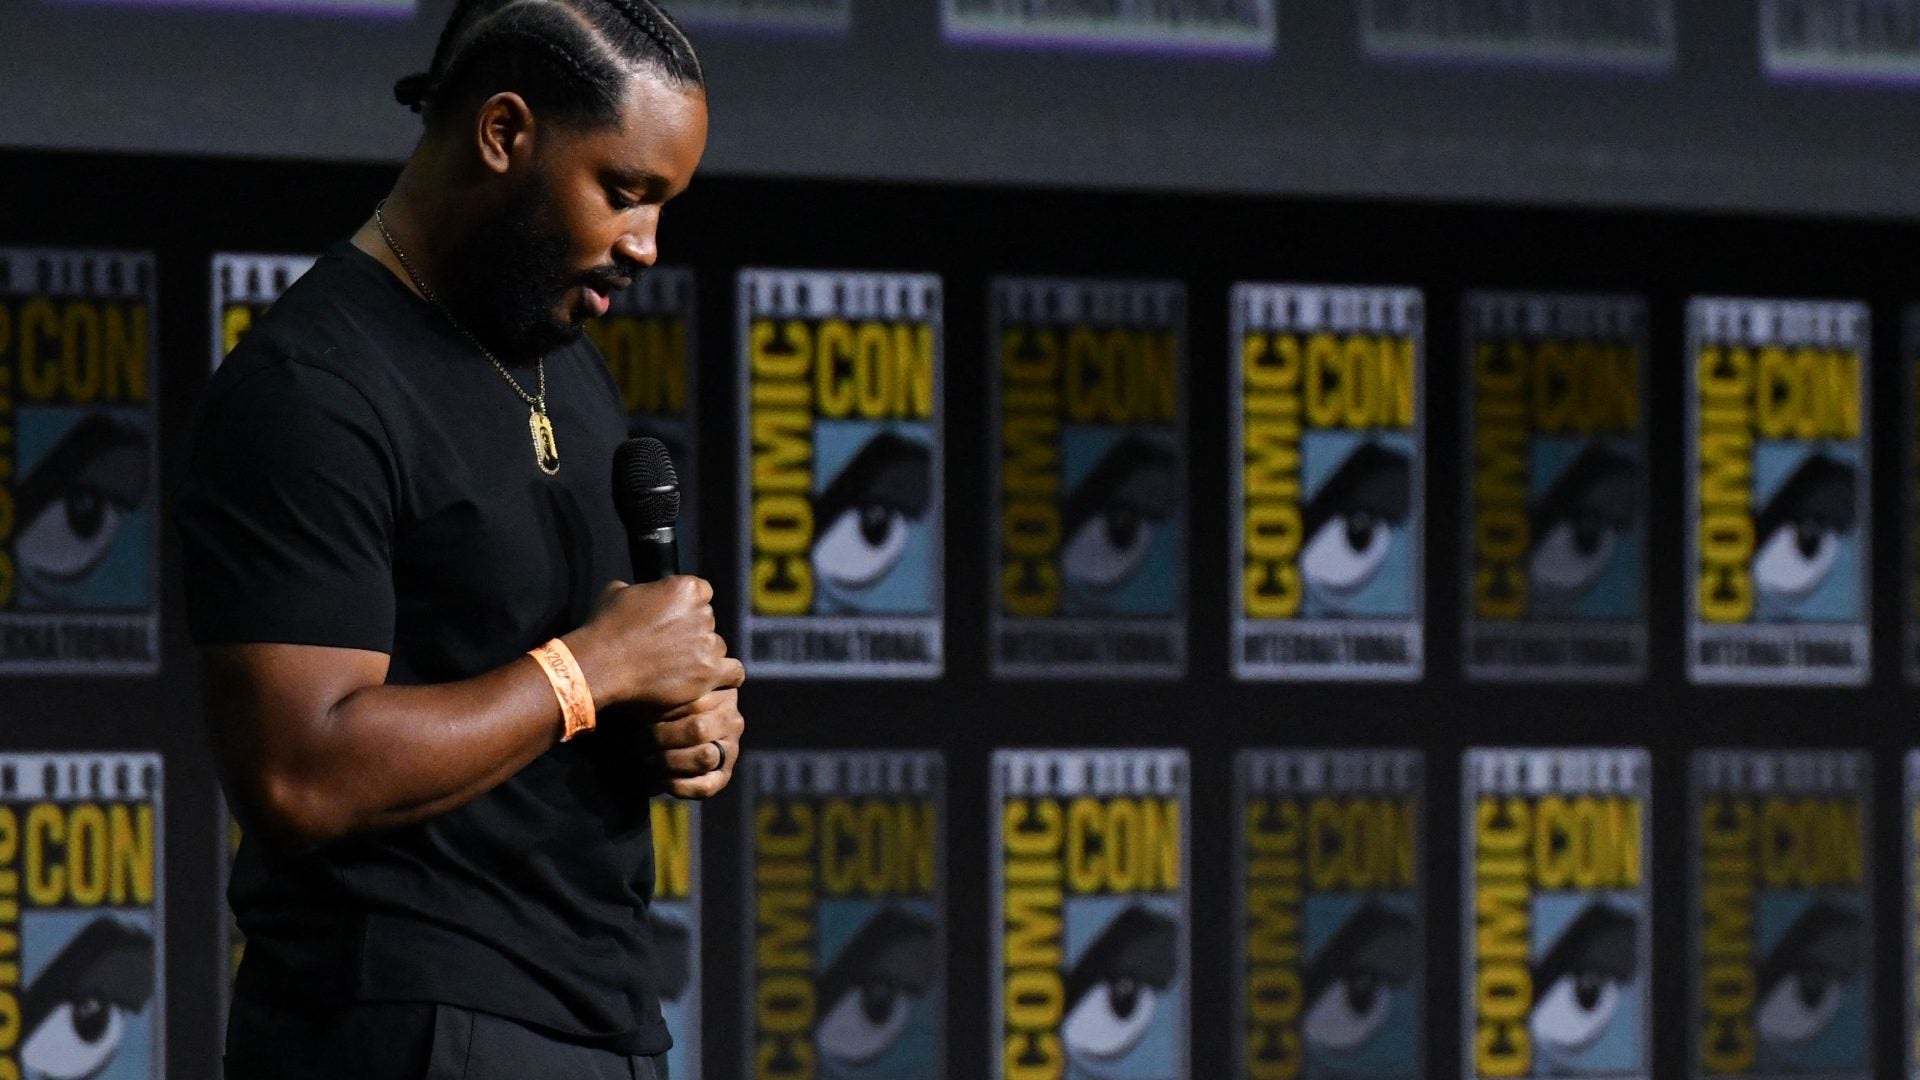 Ryan Coogler Considered Leaving Hollywood After Chadwick Boseman's Passing